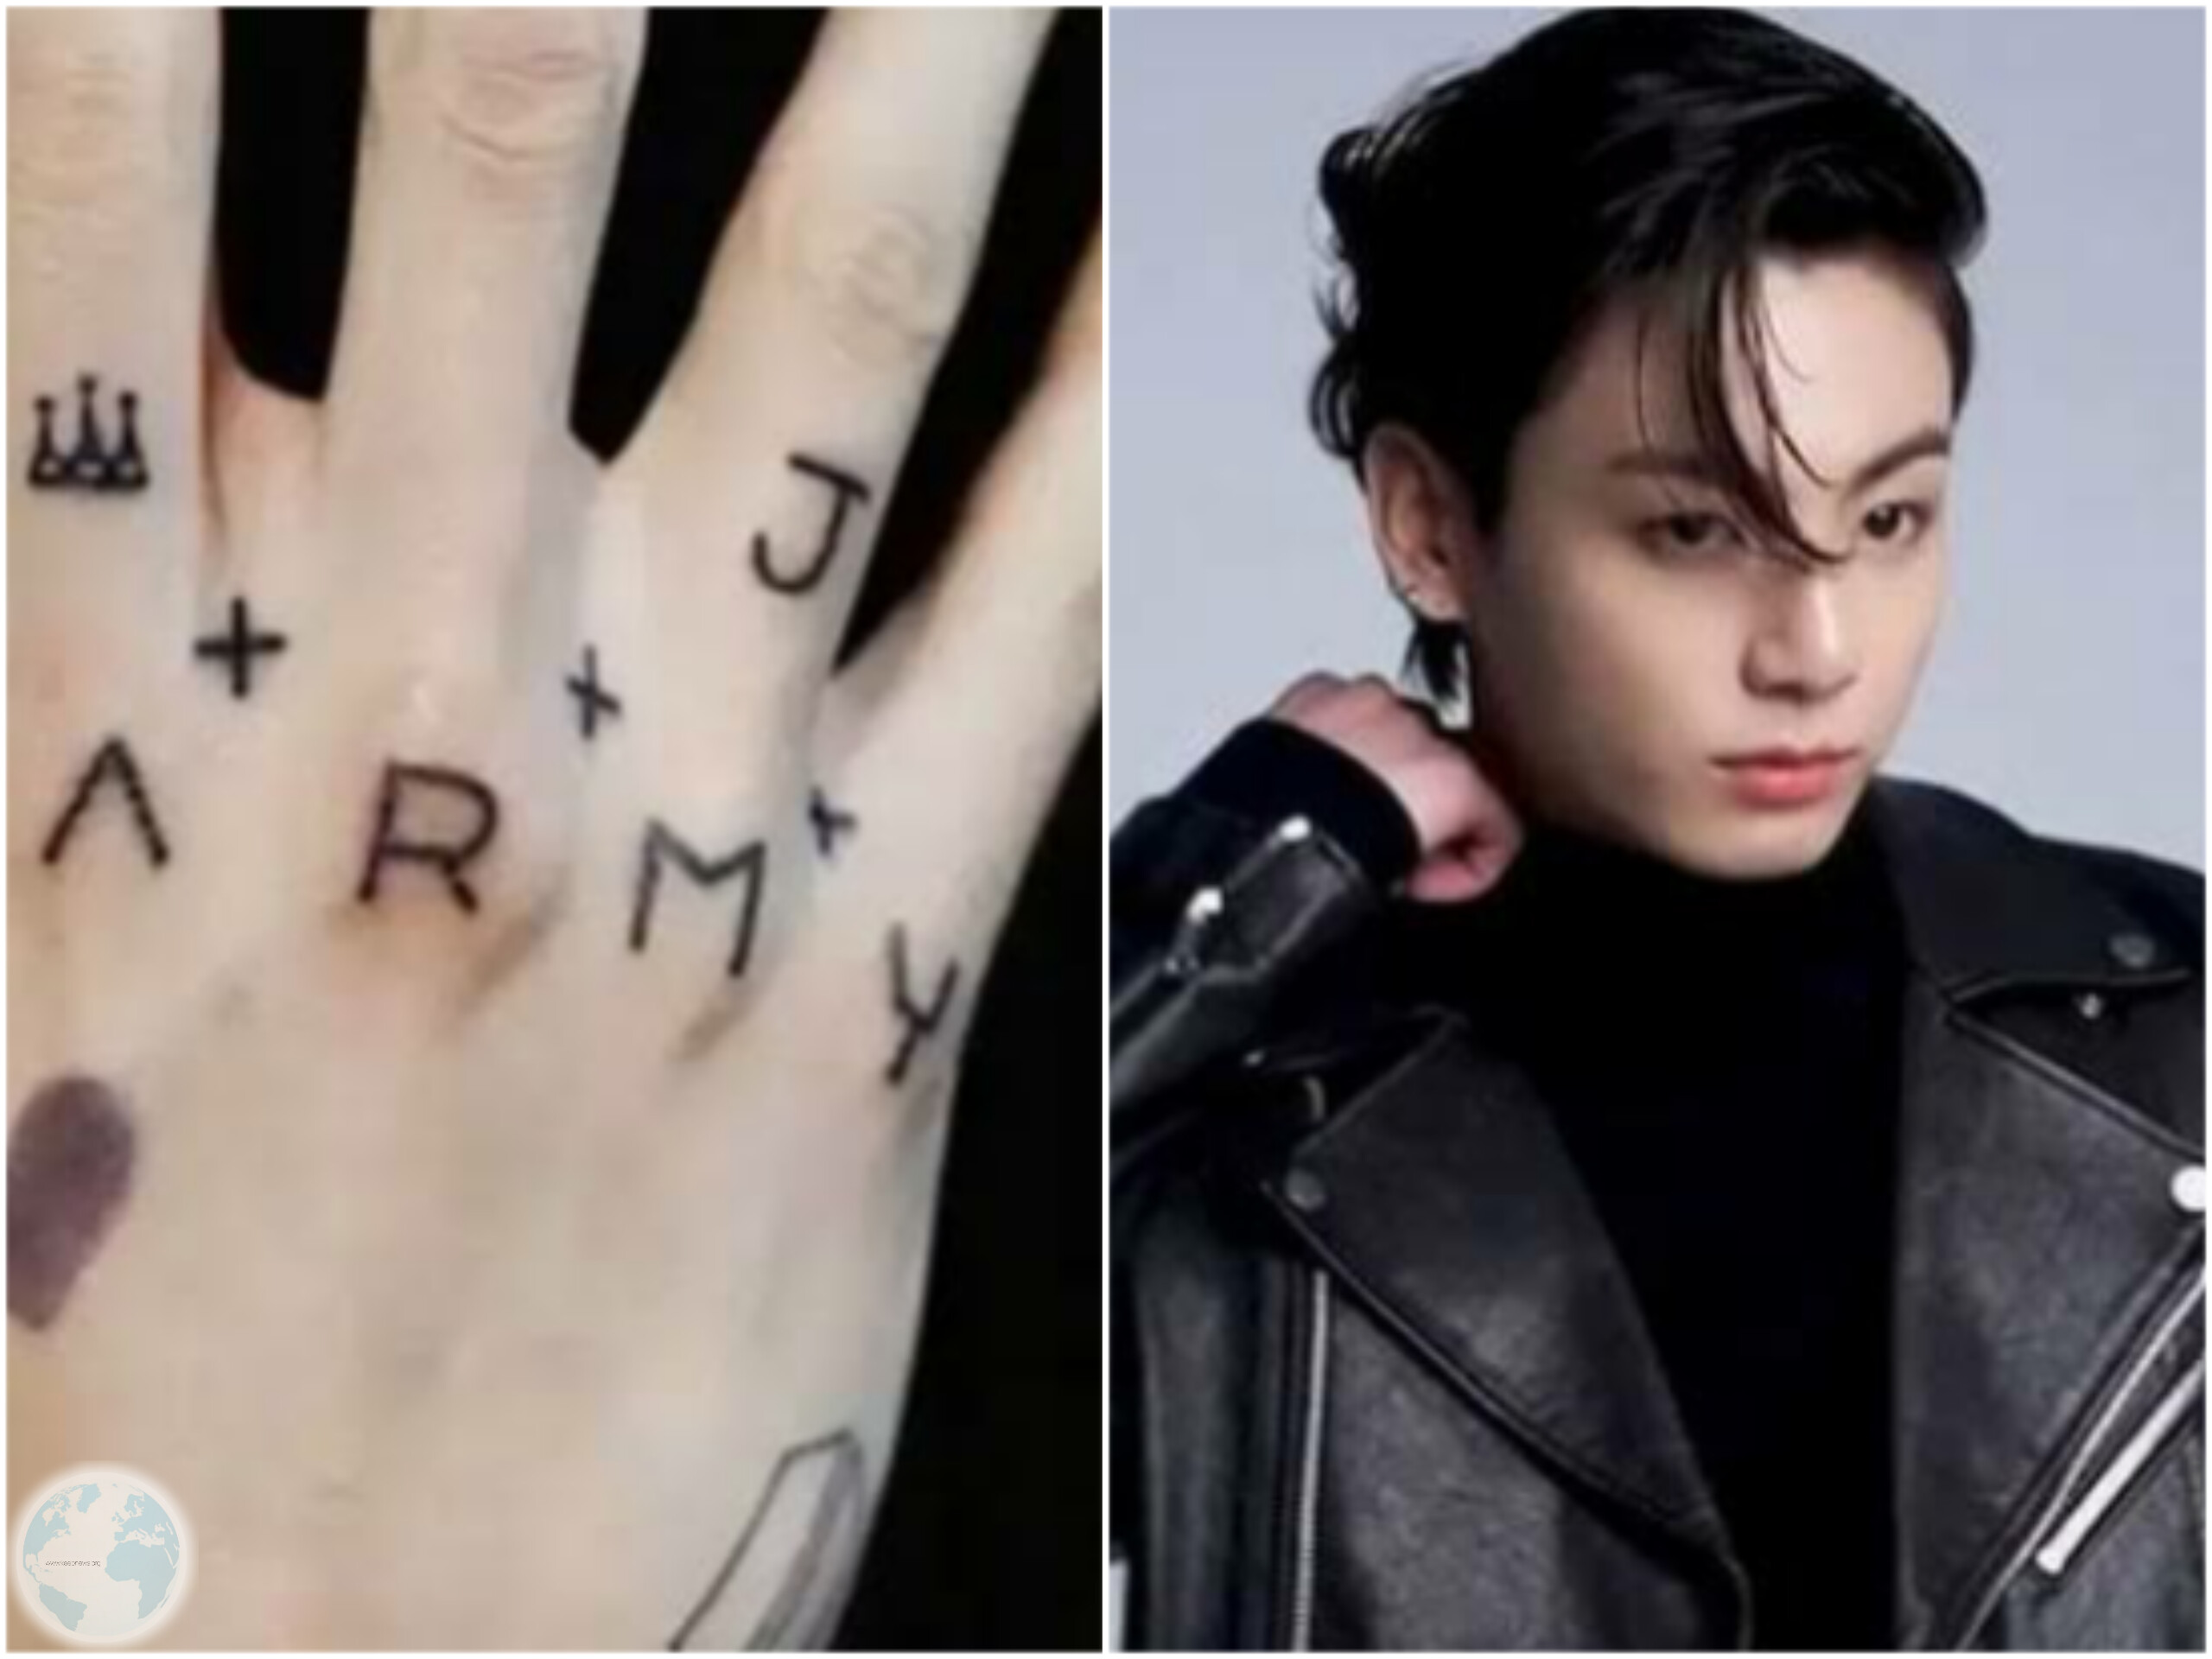 BTS member Jungkook Responded to Criticism of his Tattoos